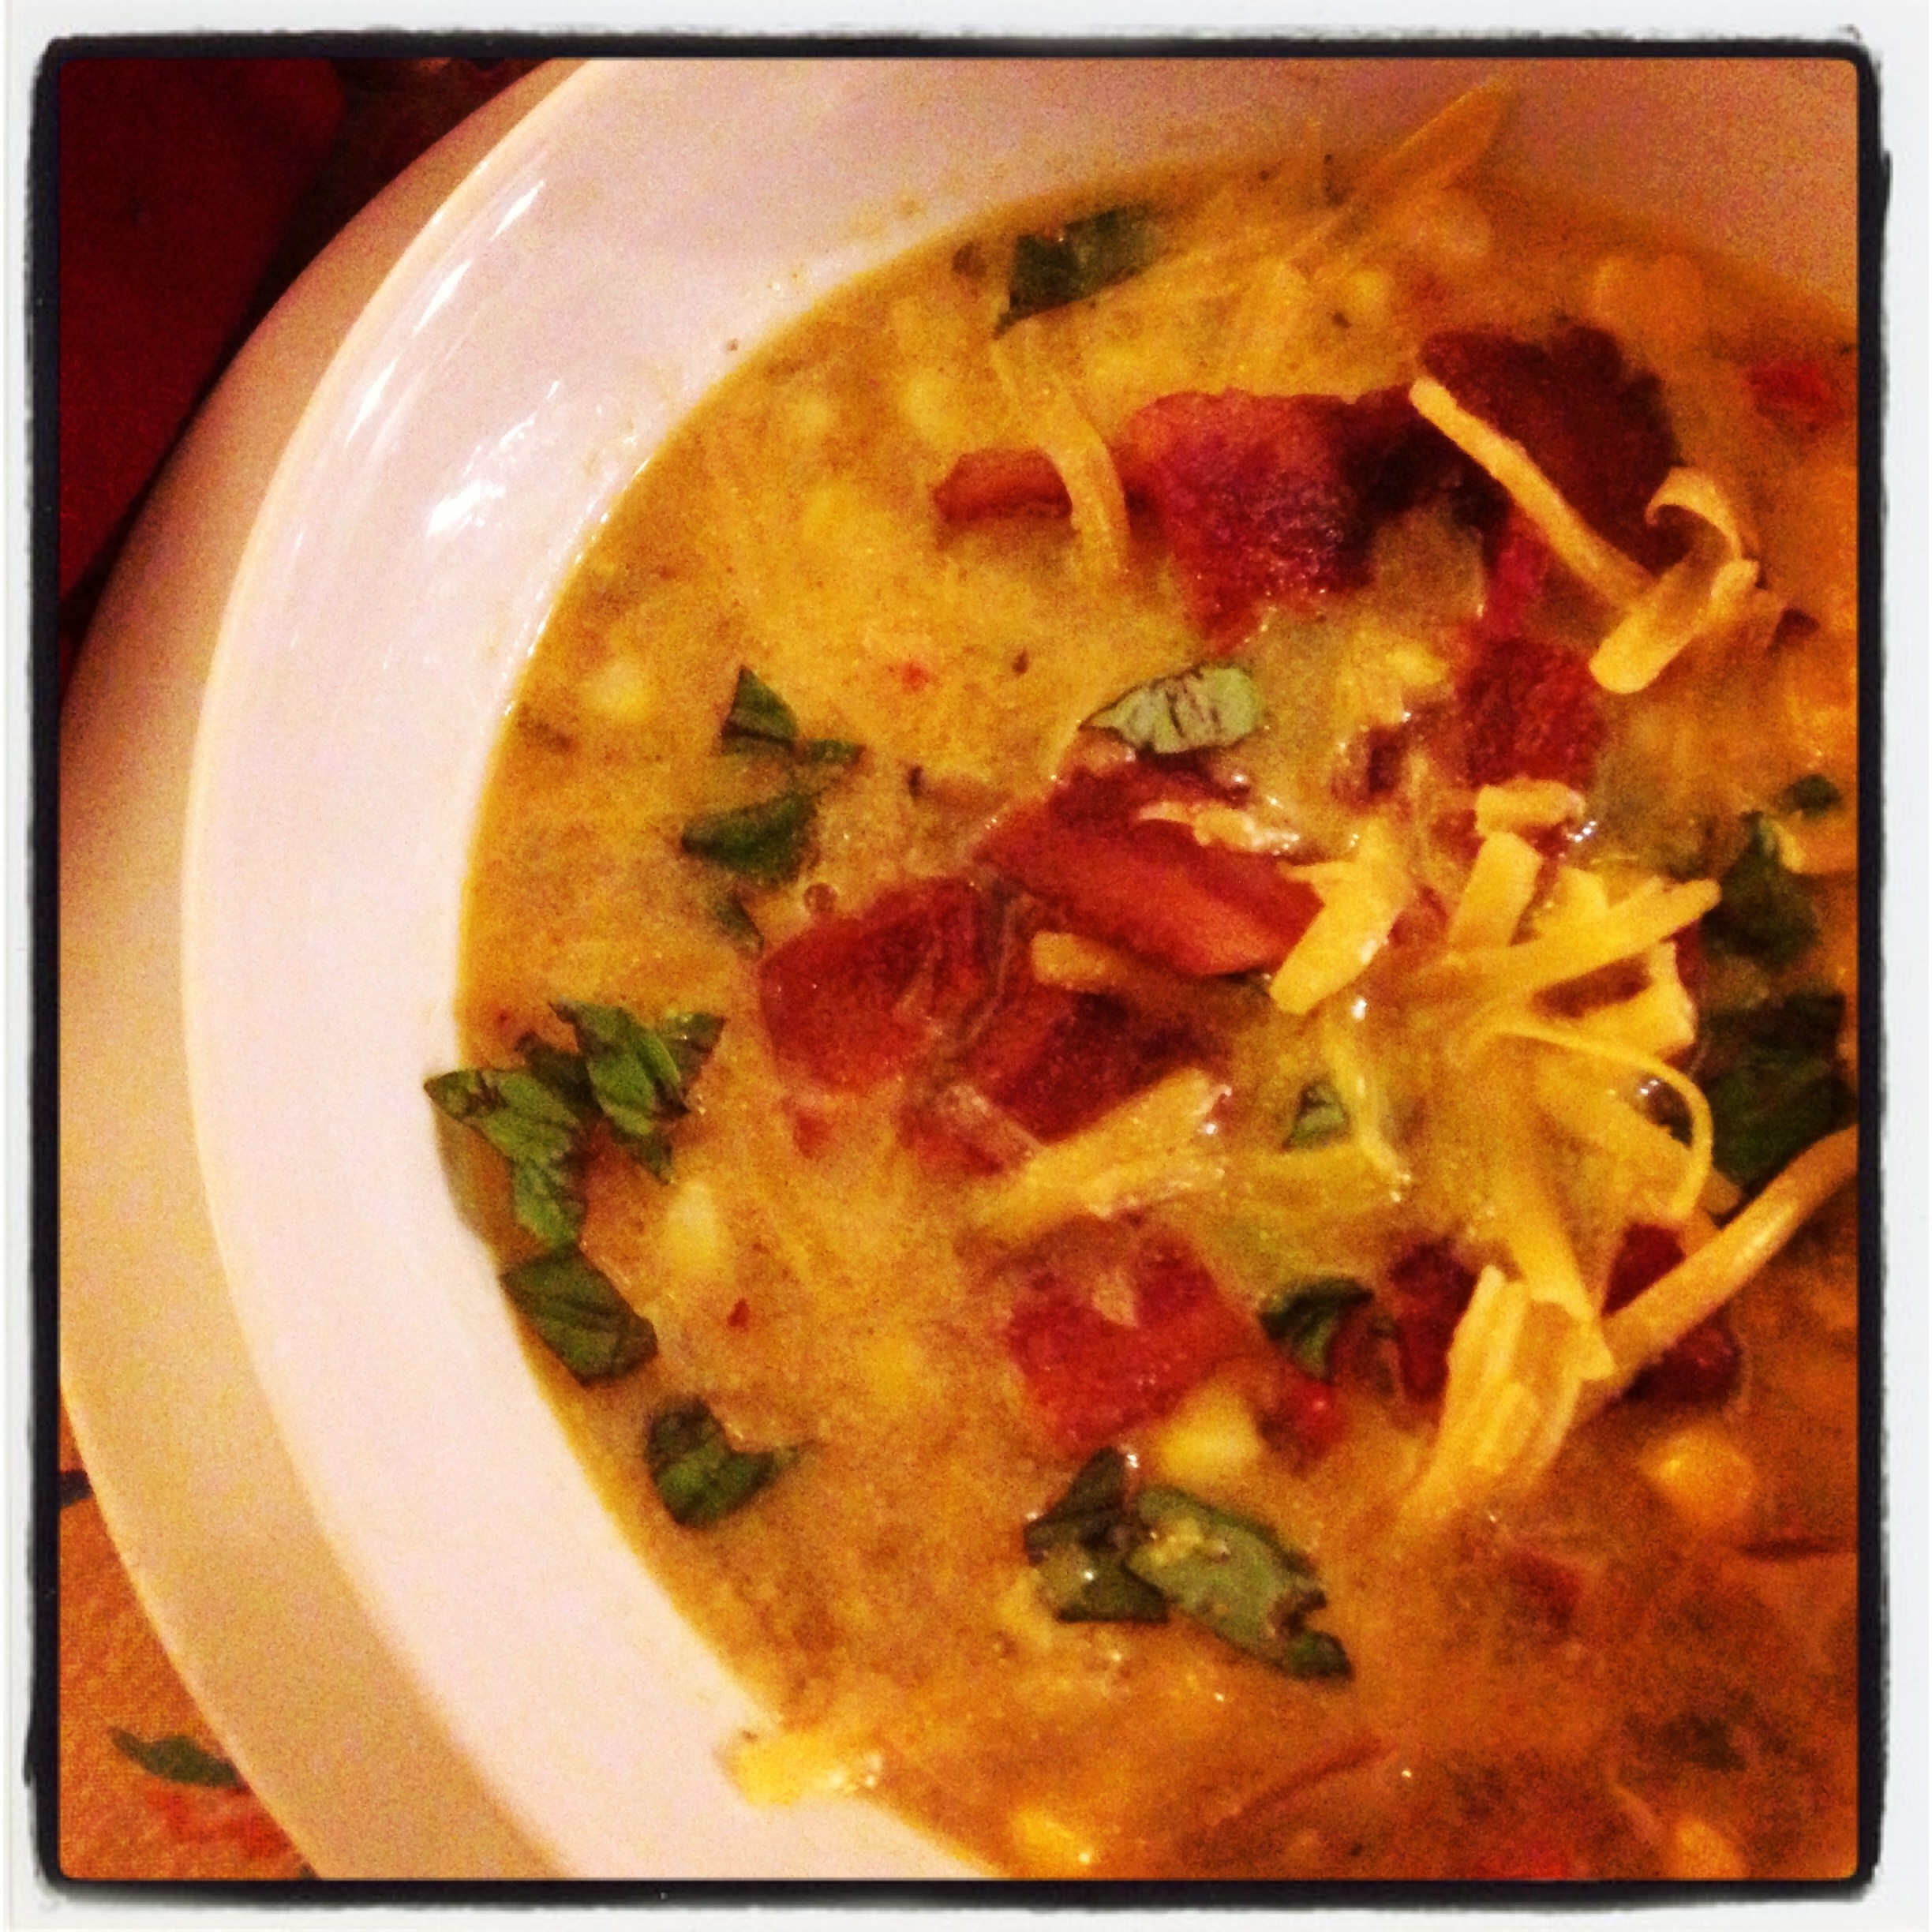 Labor Day and Late Summer Corn Chowder